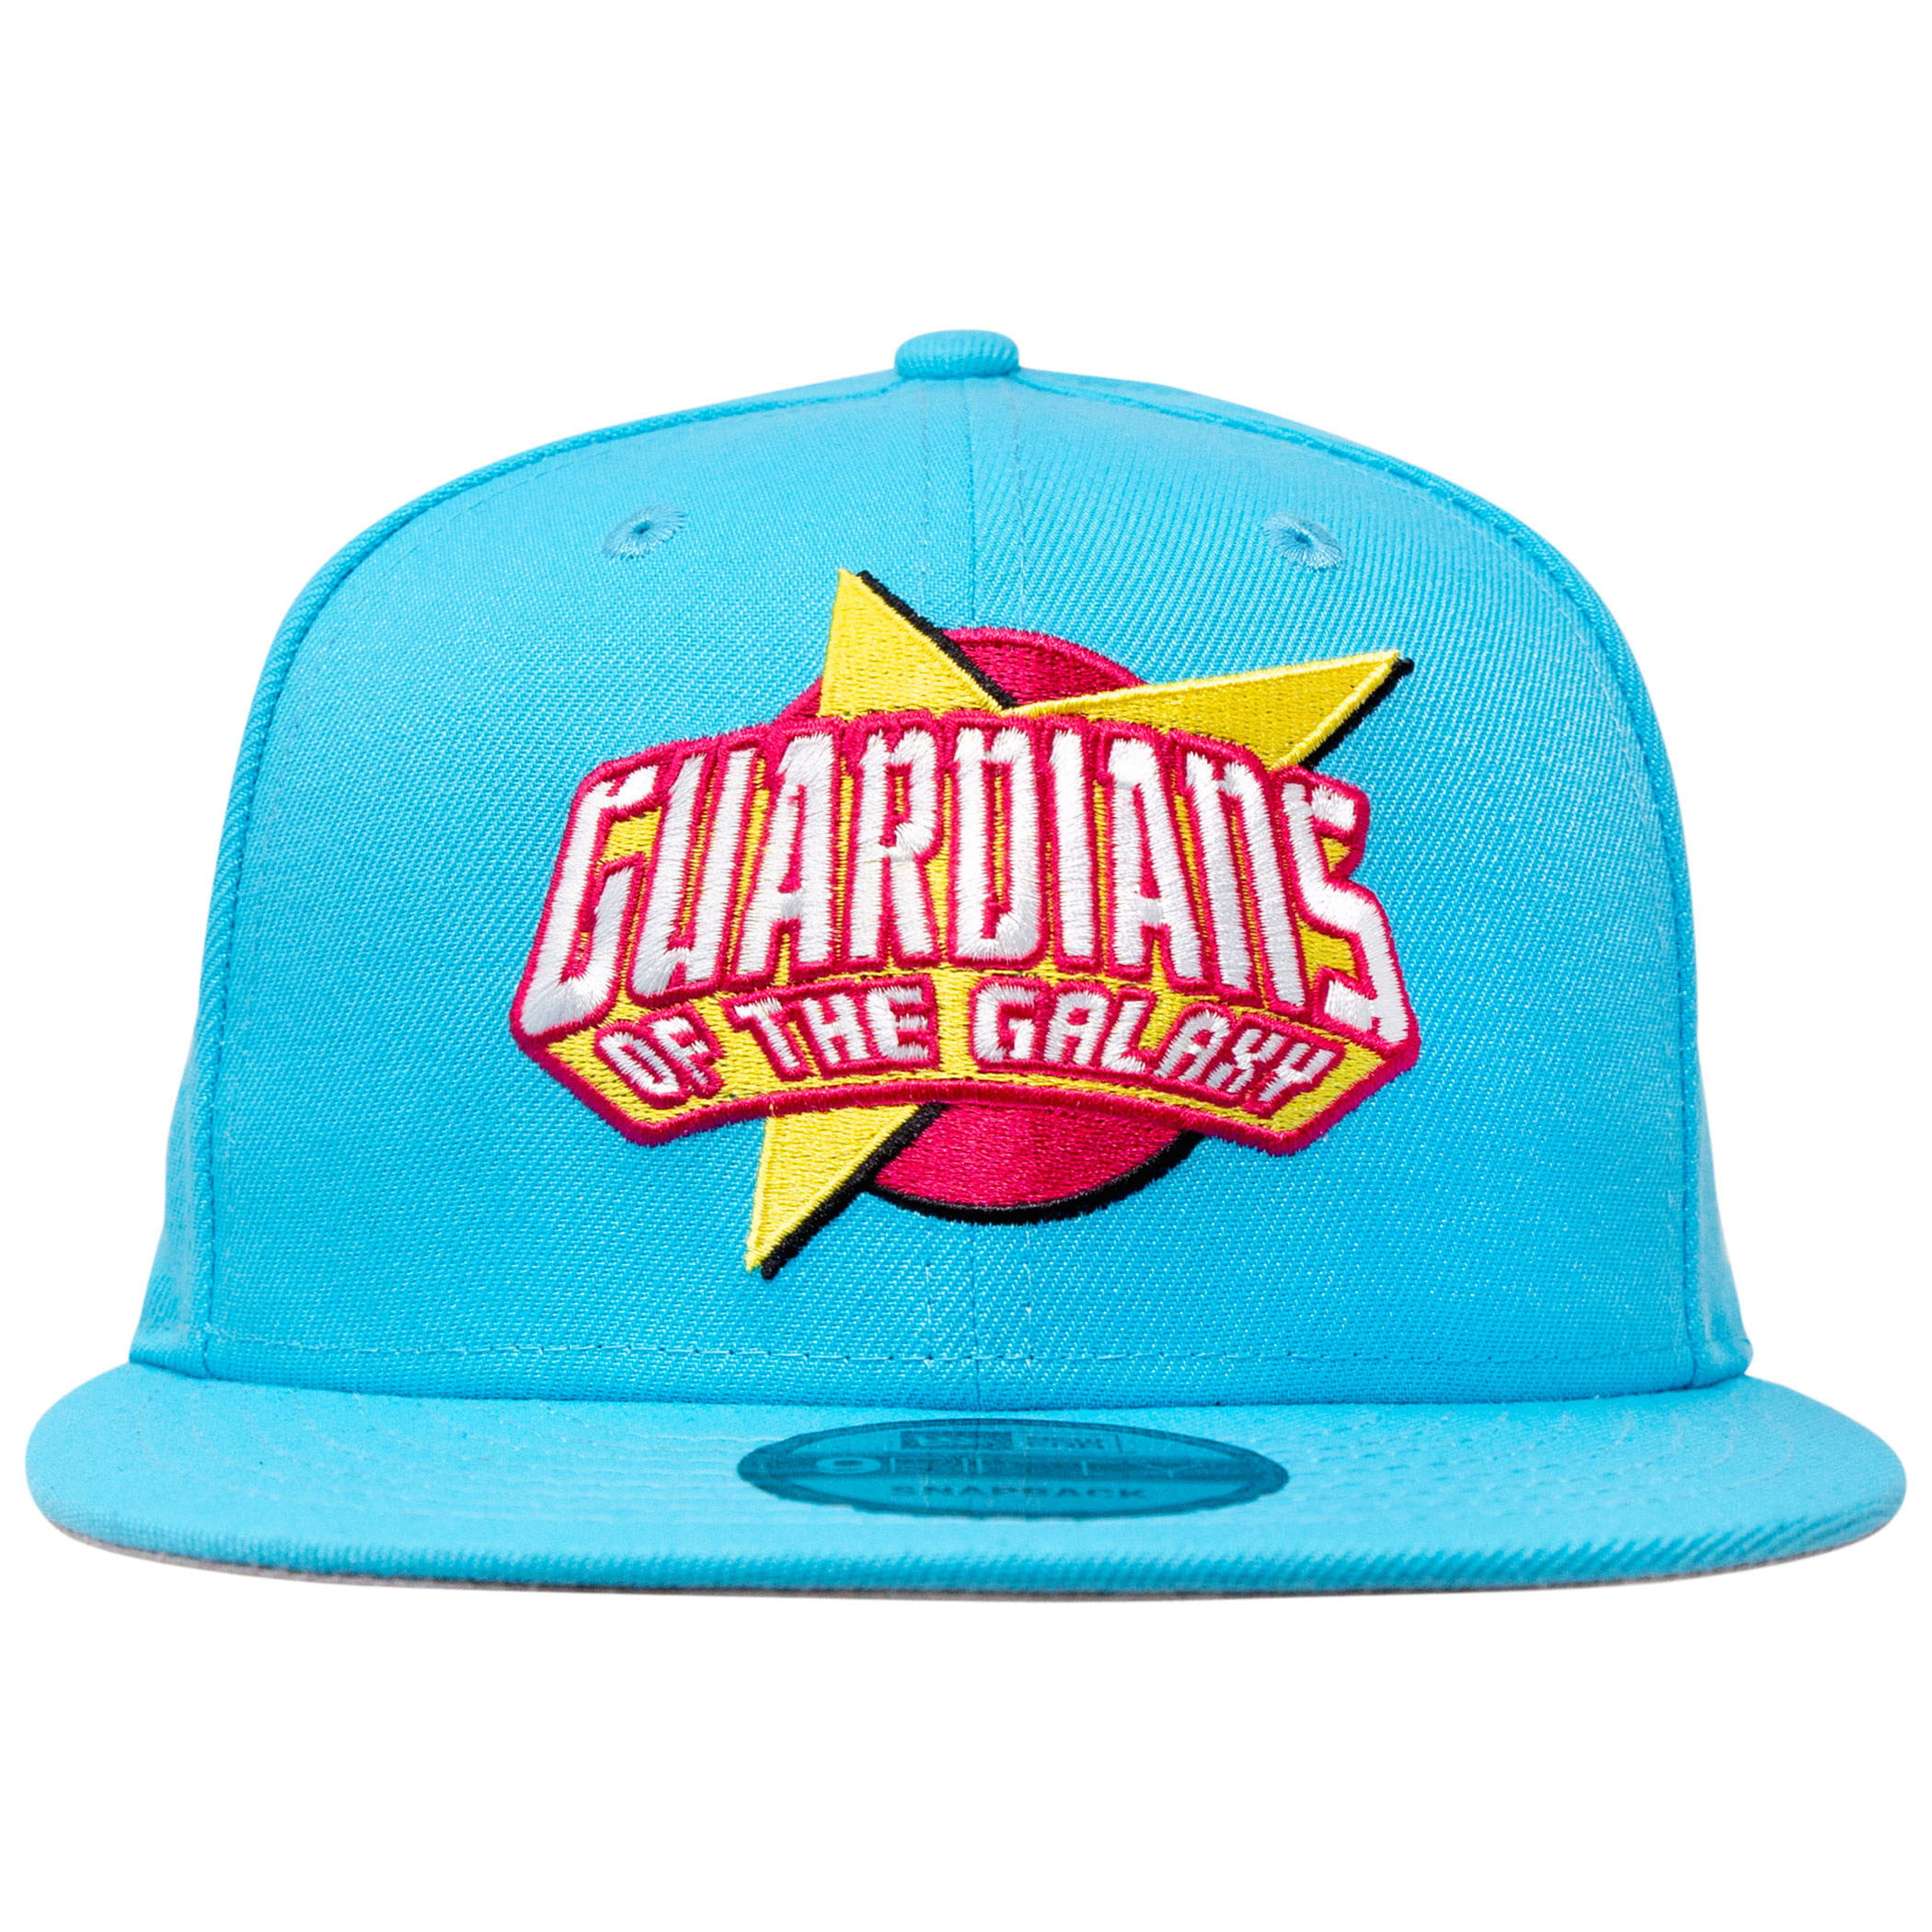 Guardians of the Galaxy Marvel 80th New Era 9Fifty Adjustable Hat